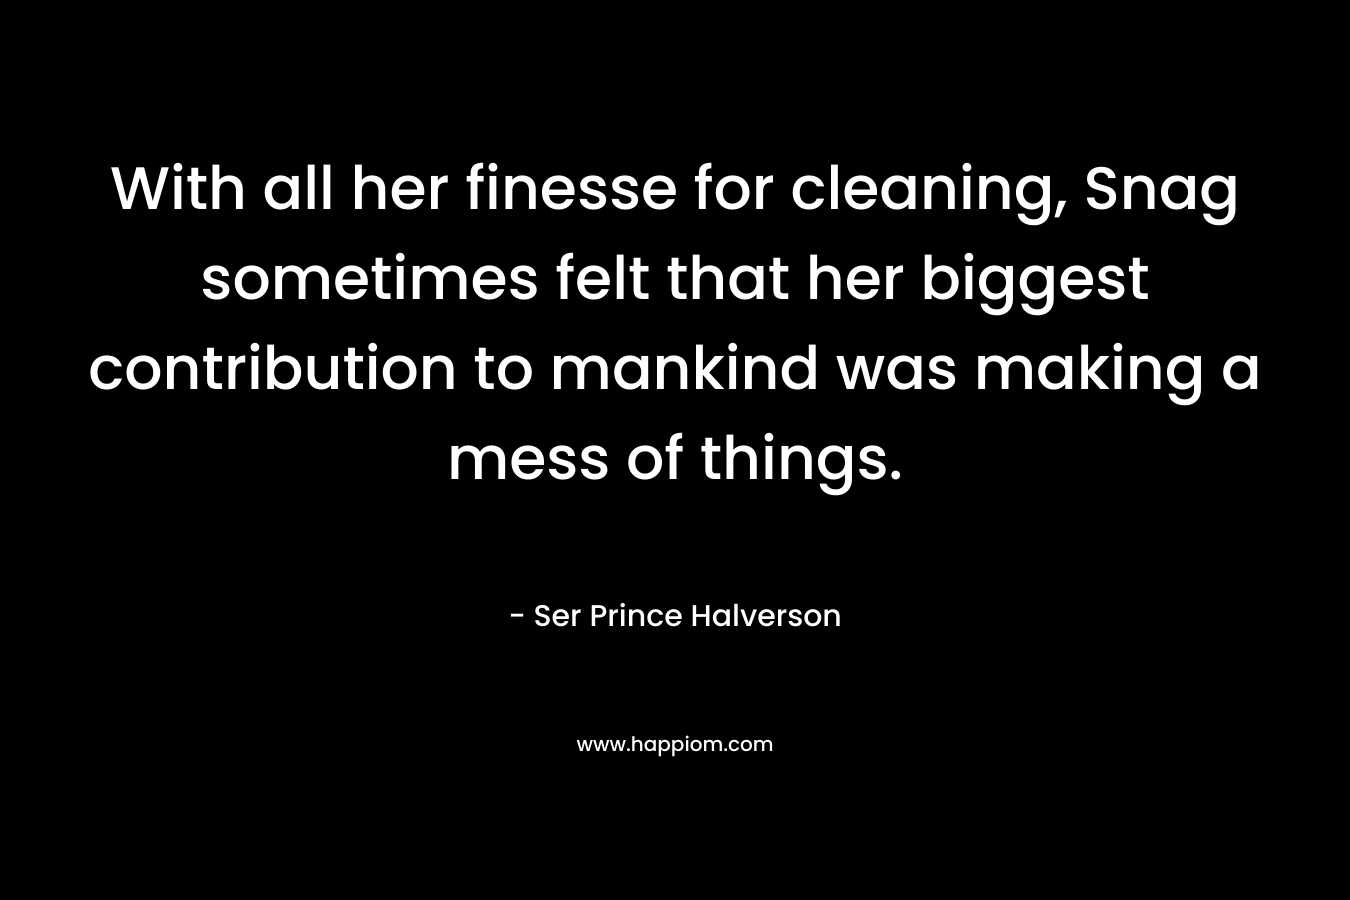 With all her finesse for cleaning, Snag sometimes felt that her biggest contribution to mankind was making a mess of things. – Ser Prince Halverson